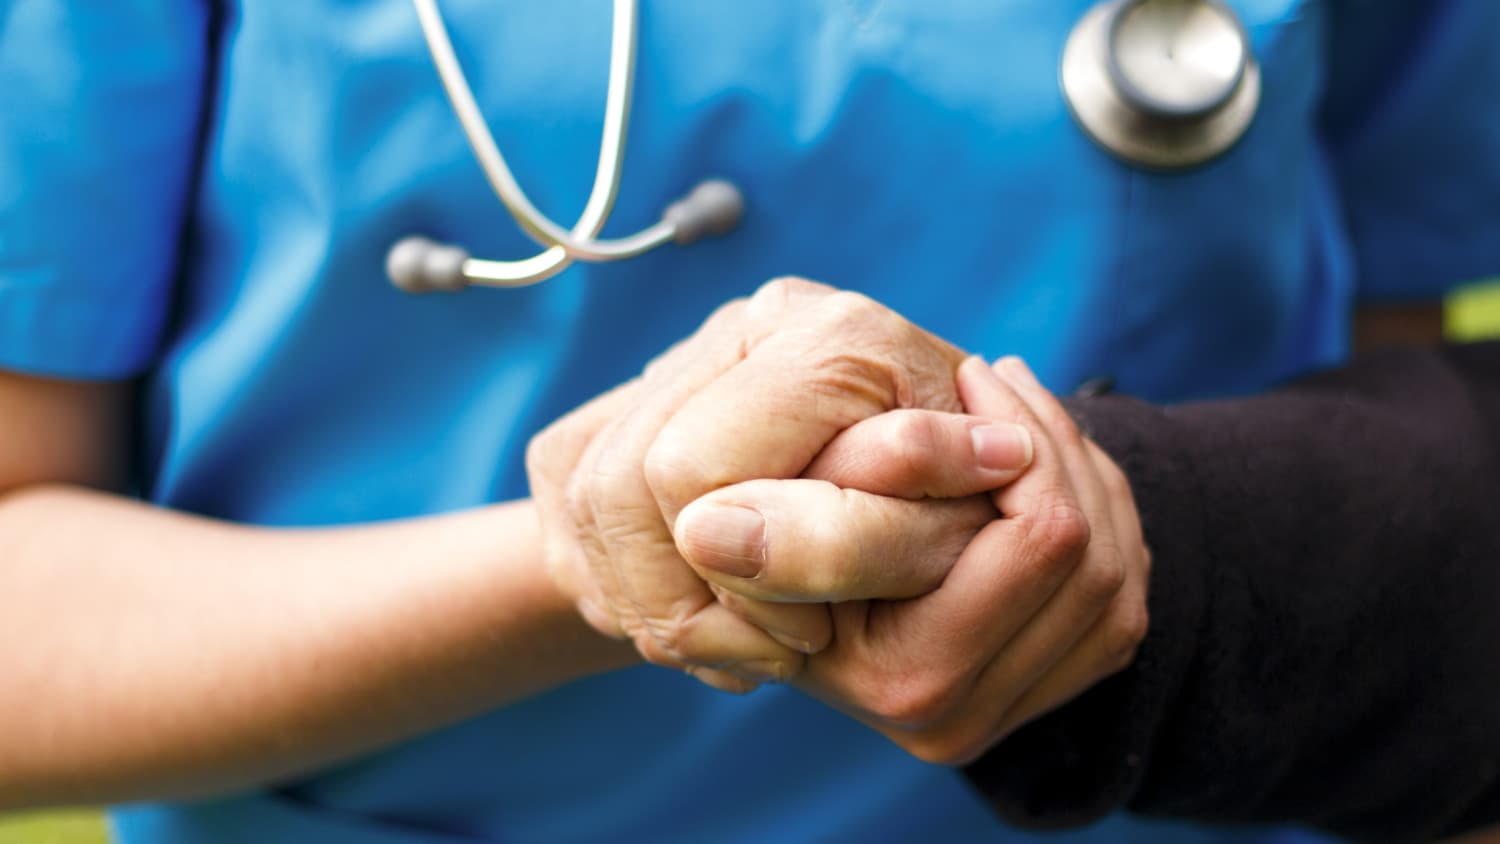 A doctor holds the hand of a patient with Parkinson's